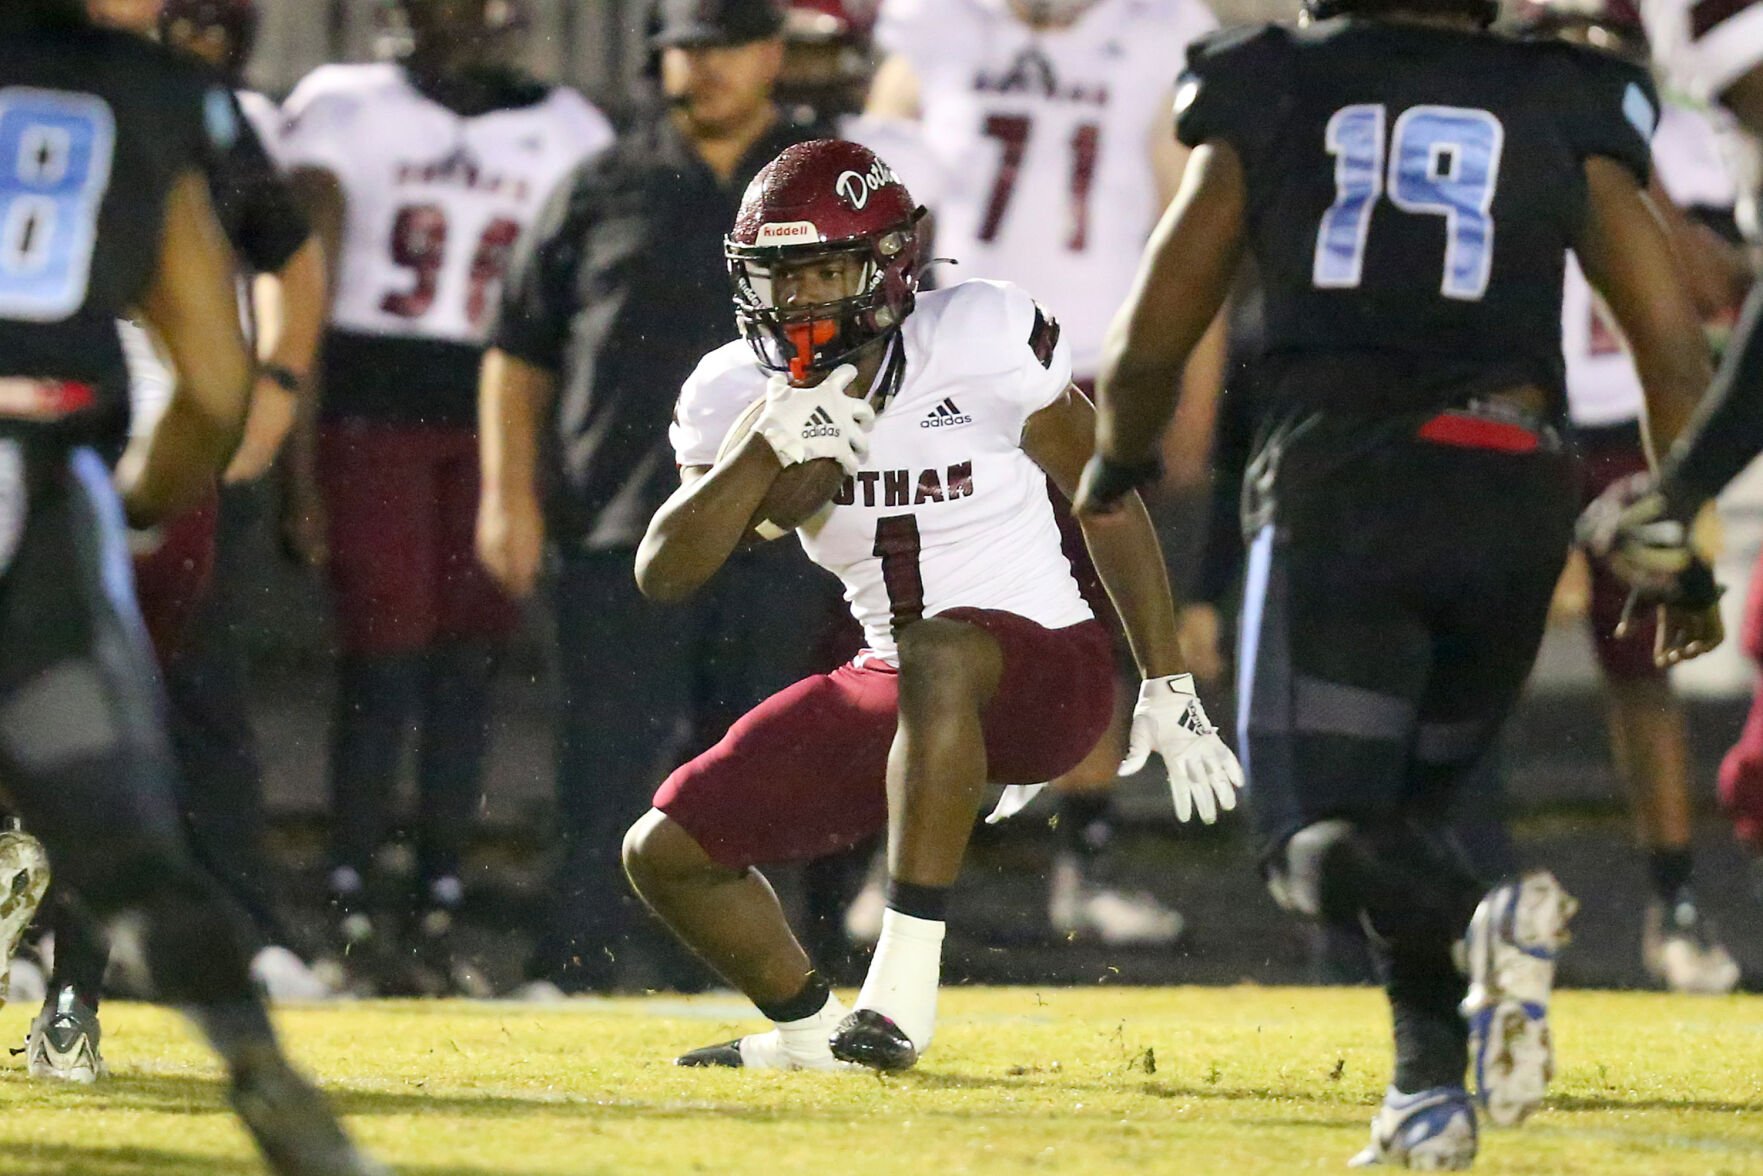 Dothan defeated in first round of playoffs as Mary G. Montgomery rallies for victory